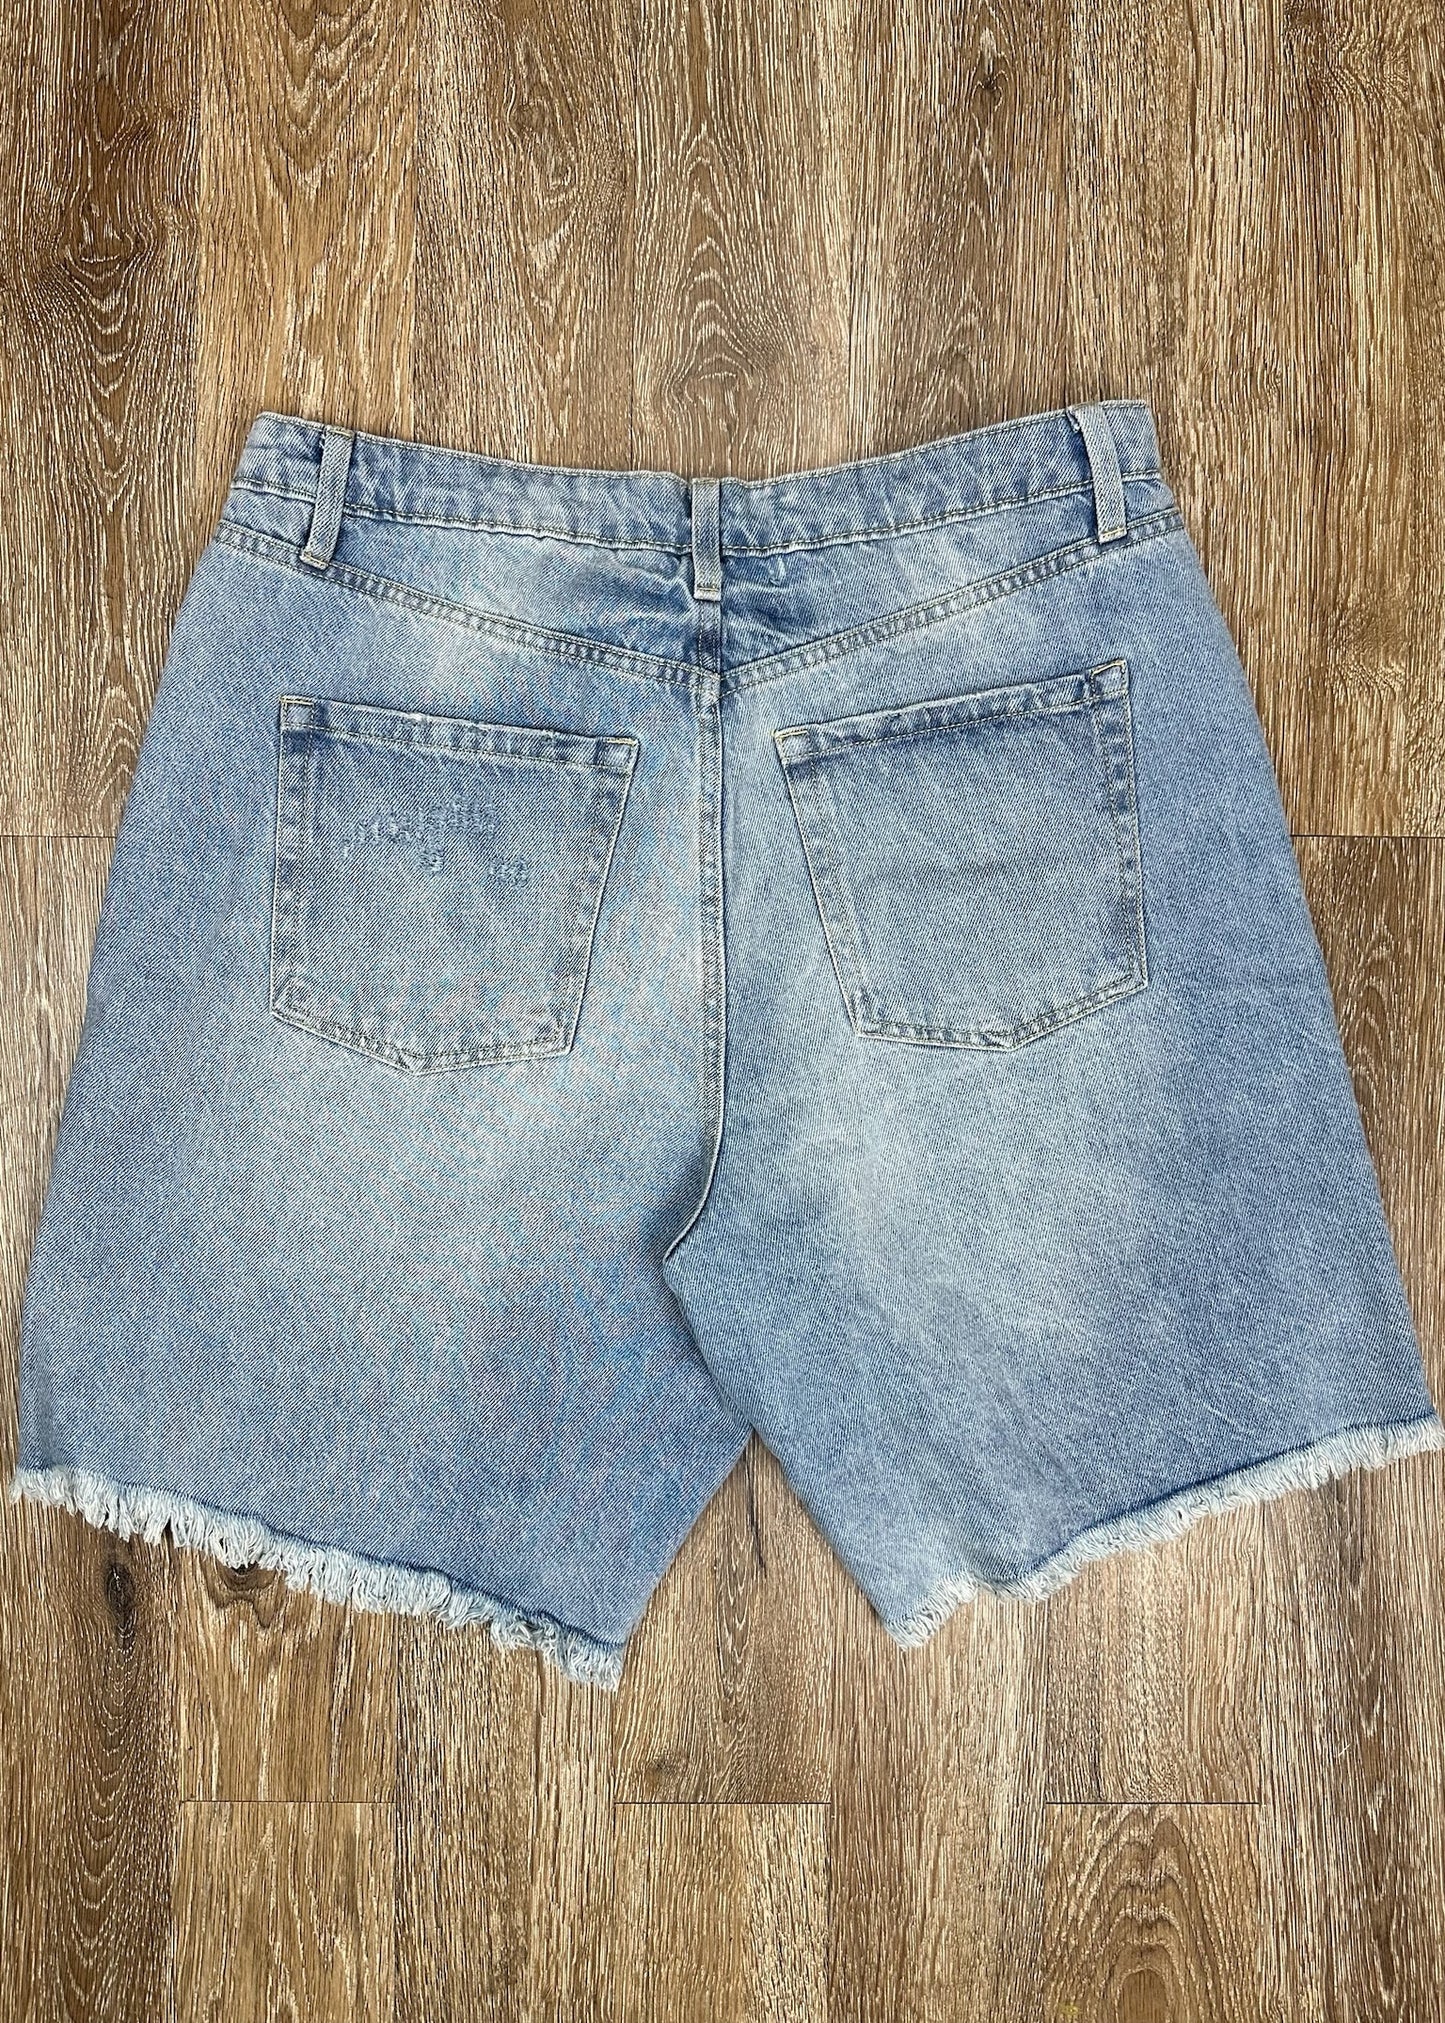 Light Denim Shorts by Wild Fable